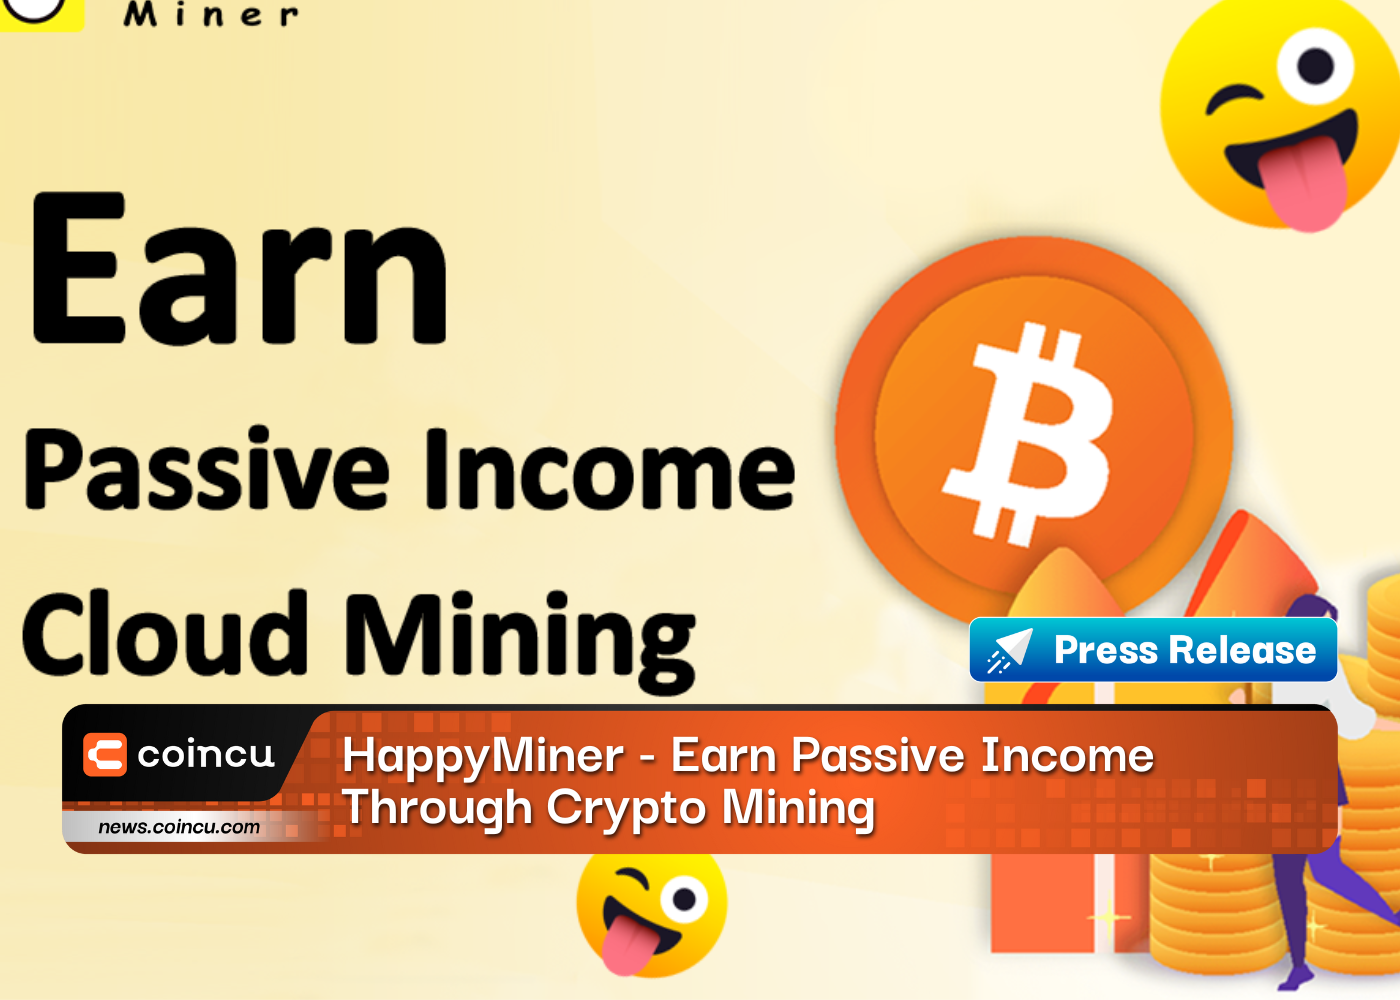 HappyMiner - Earn Passive Income Through Crypto Mining